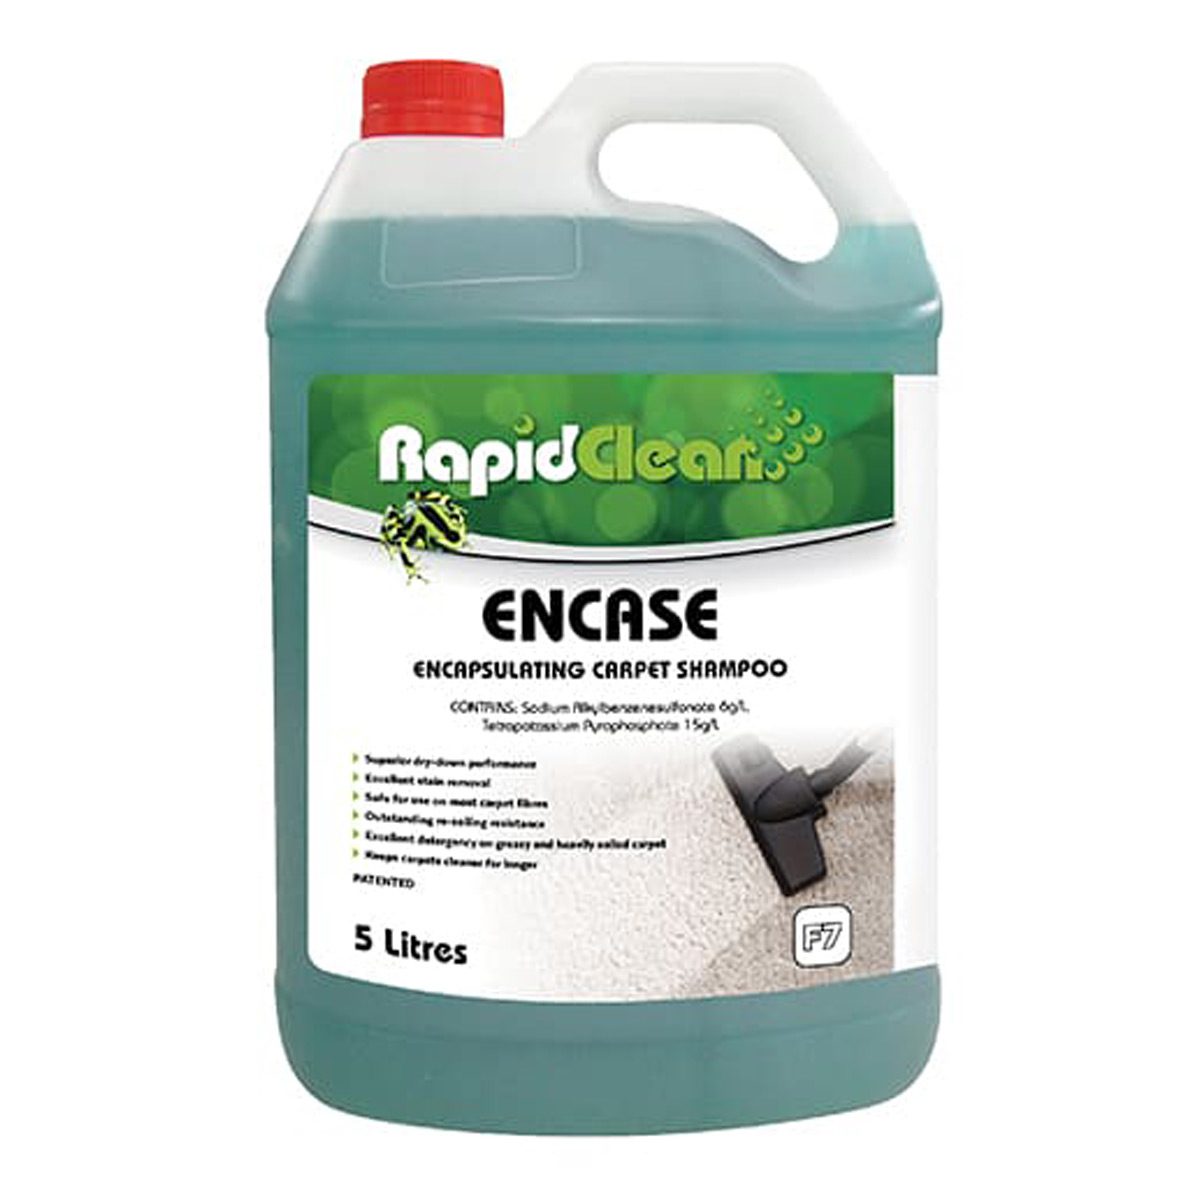 cleaning-products-floorcare-rapidclean-encase—carpet-shampoo-5L-litre-crystallising-polymer-technology-which-enables-residual-encapsulated-soil-to-be-removed-vjs-distributors-U-141060